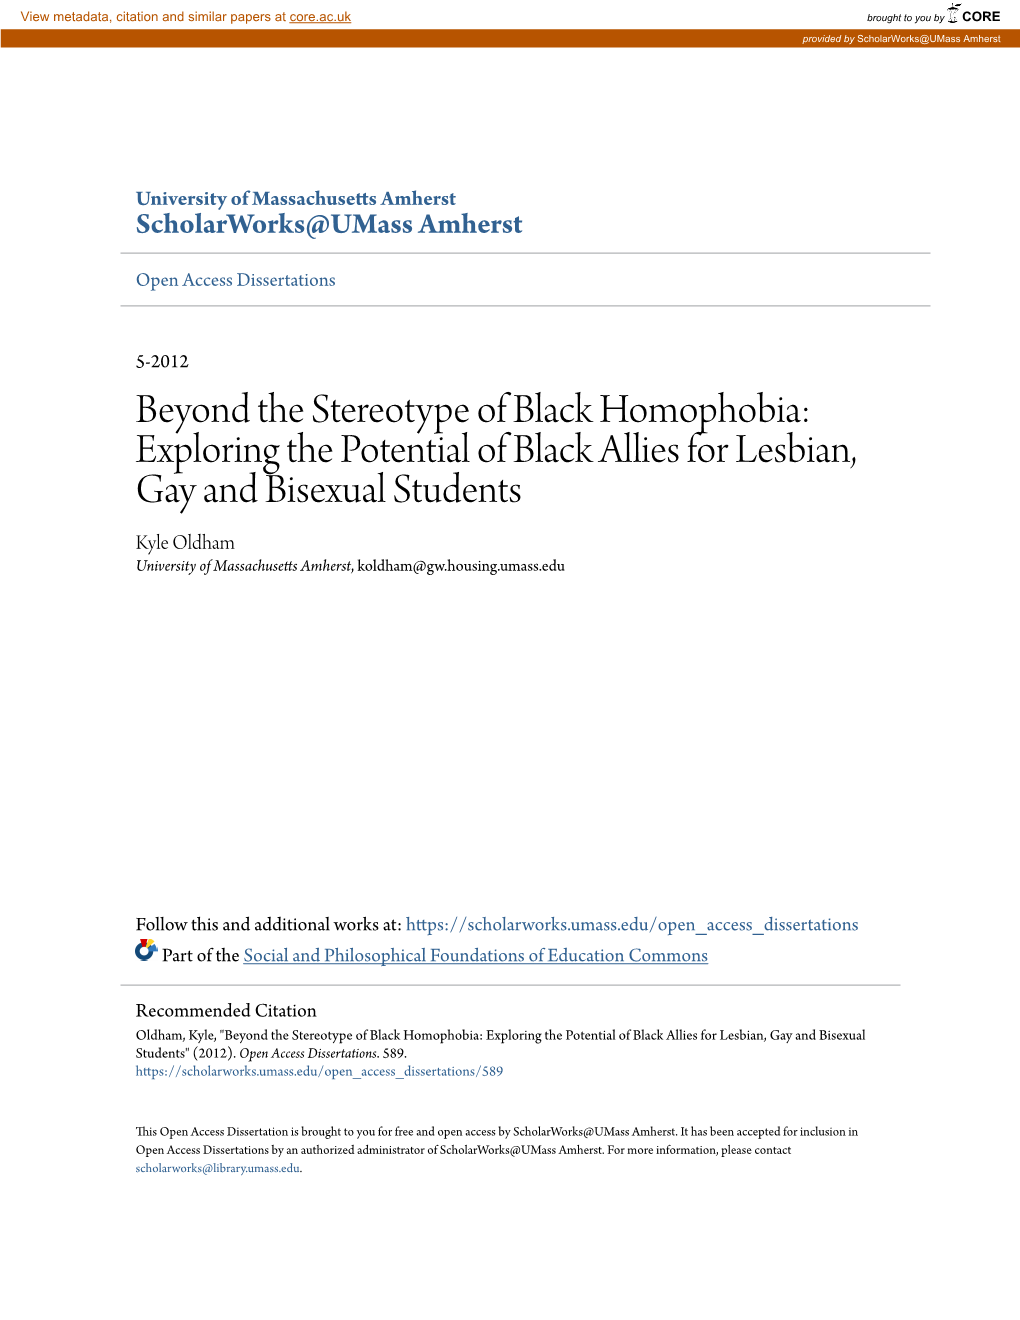 Beyond the Stereotype of Black Homophobia